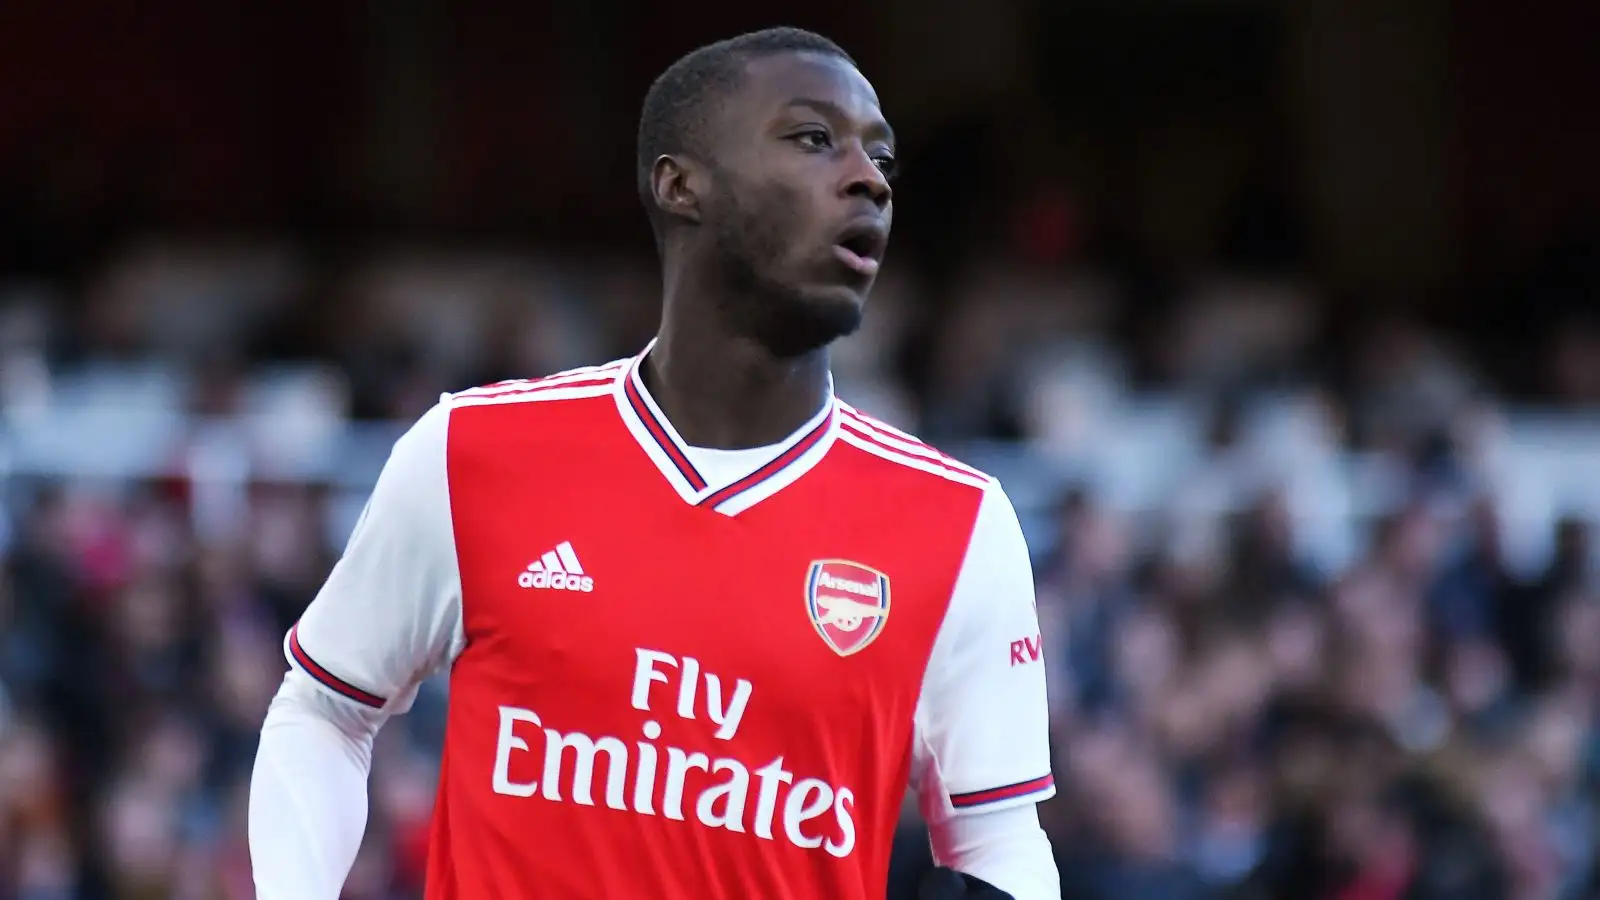 Arsenal winger Nicolas Pepe during a match.